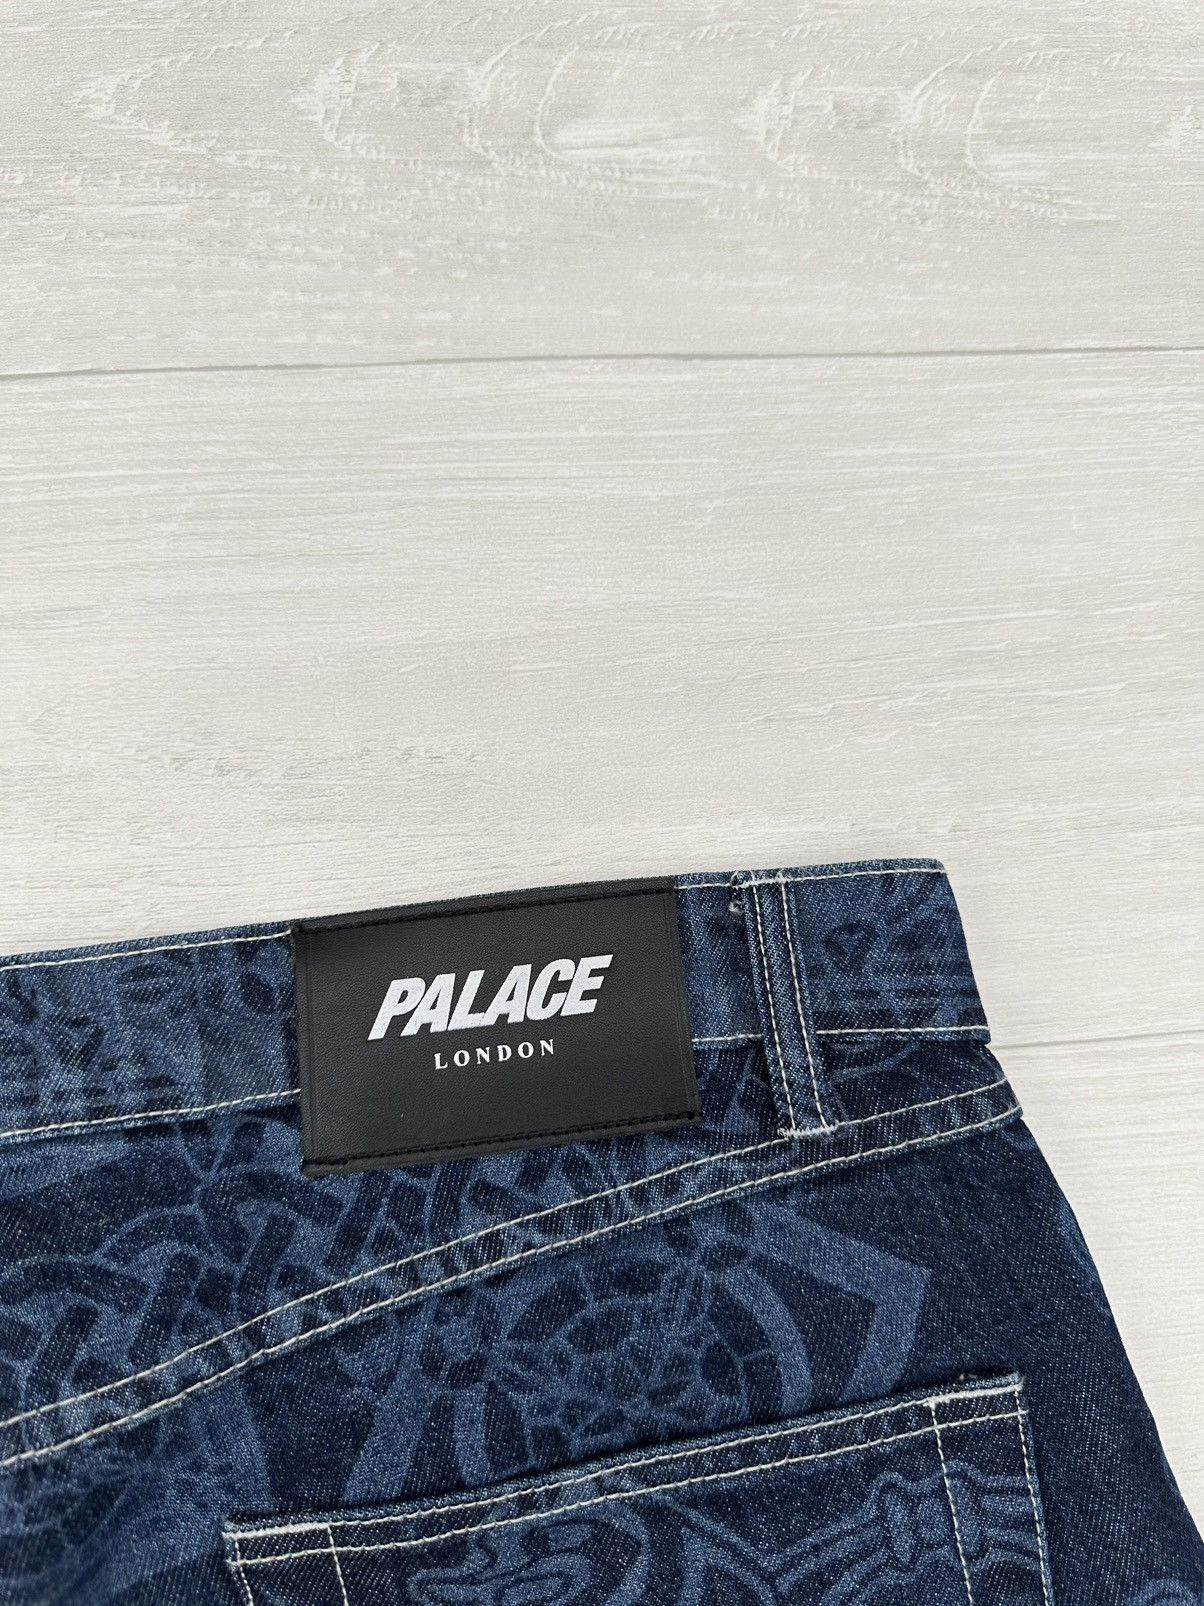 Palace Palace Medieval Trouser Blue Denim Old English Jeans Sz. 32 ...